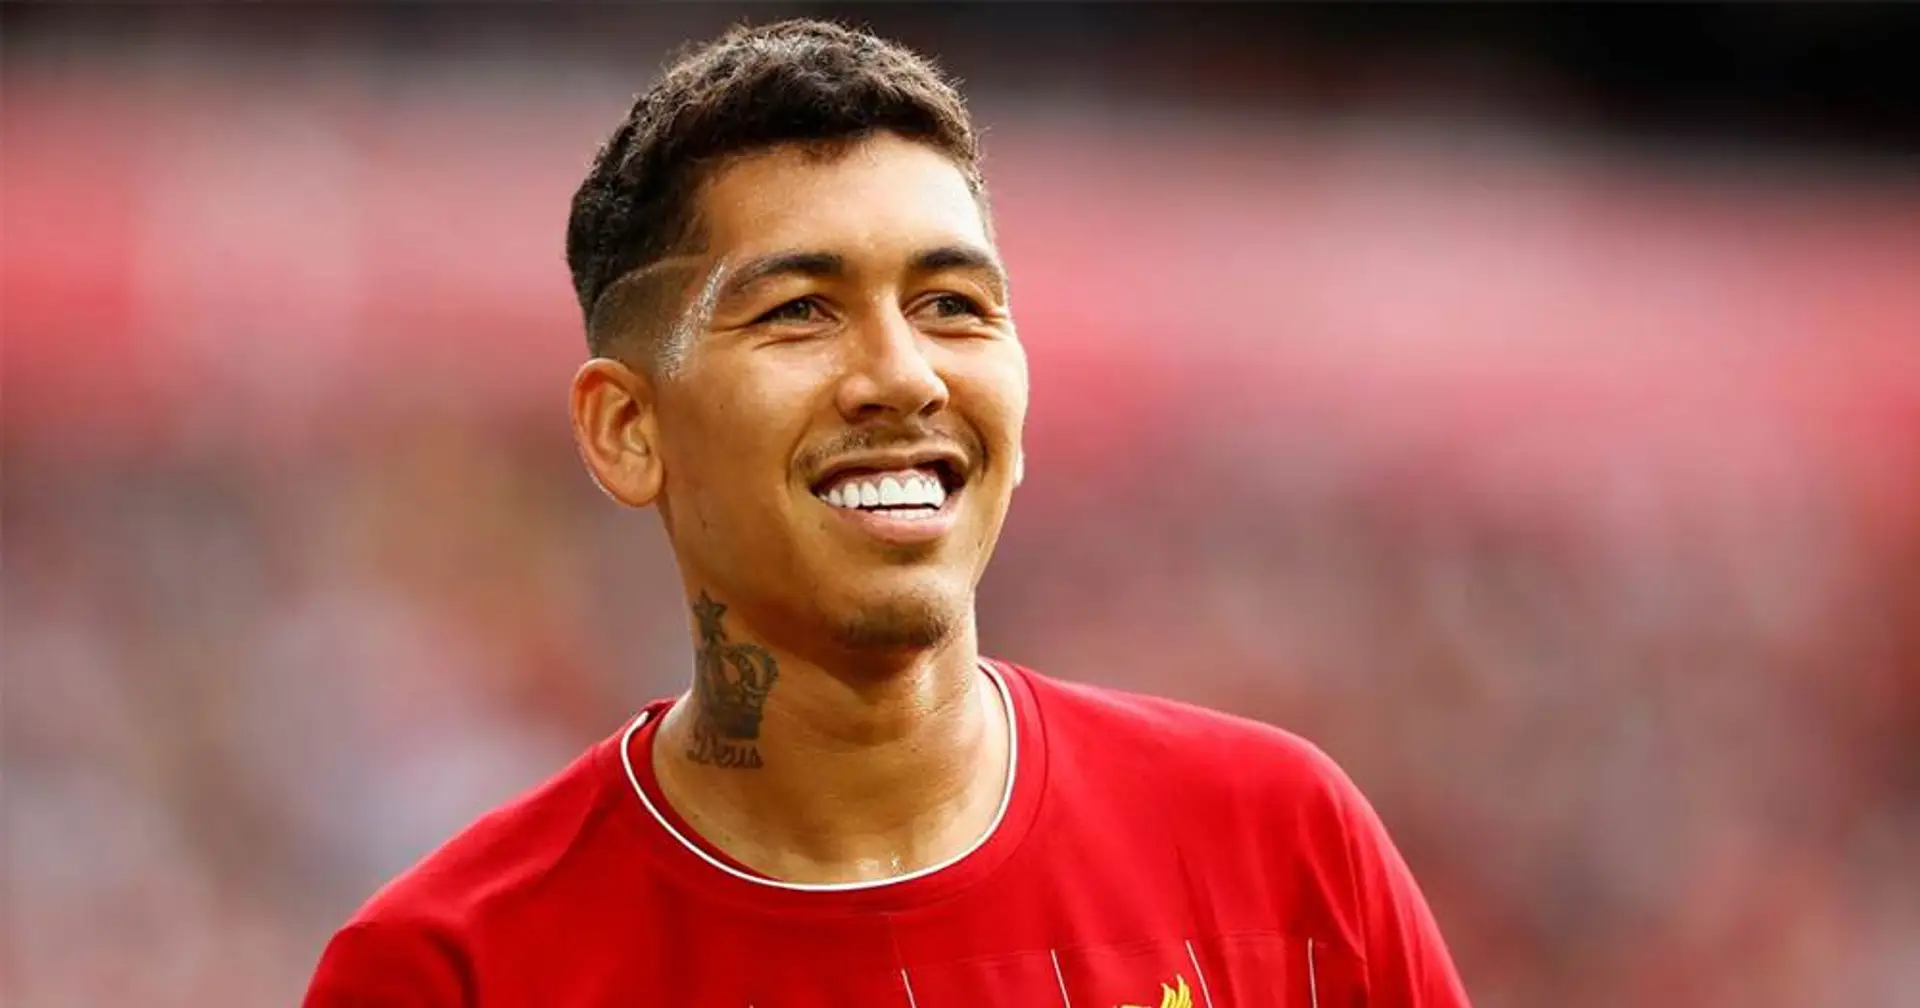 'The Engine!'; '3rd most important player': Fans assess Bobby Firmino's 5 years at Liverpool